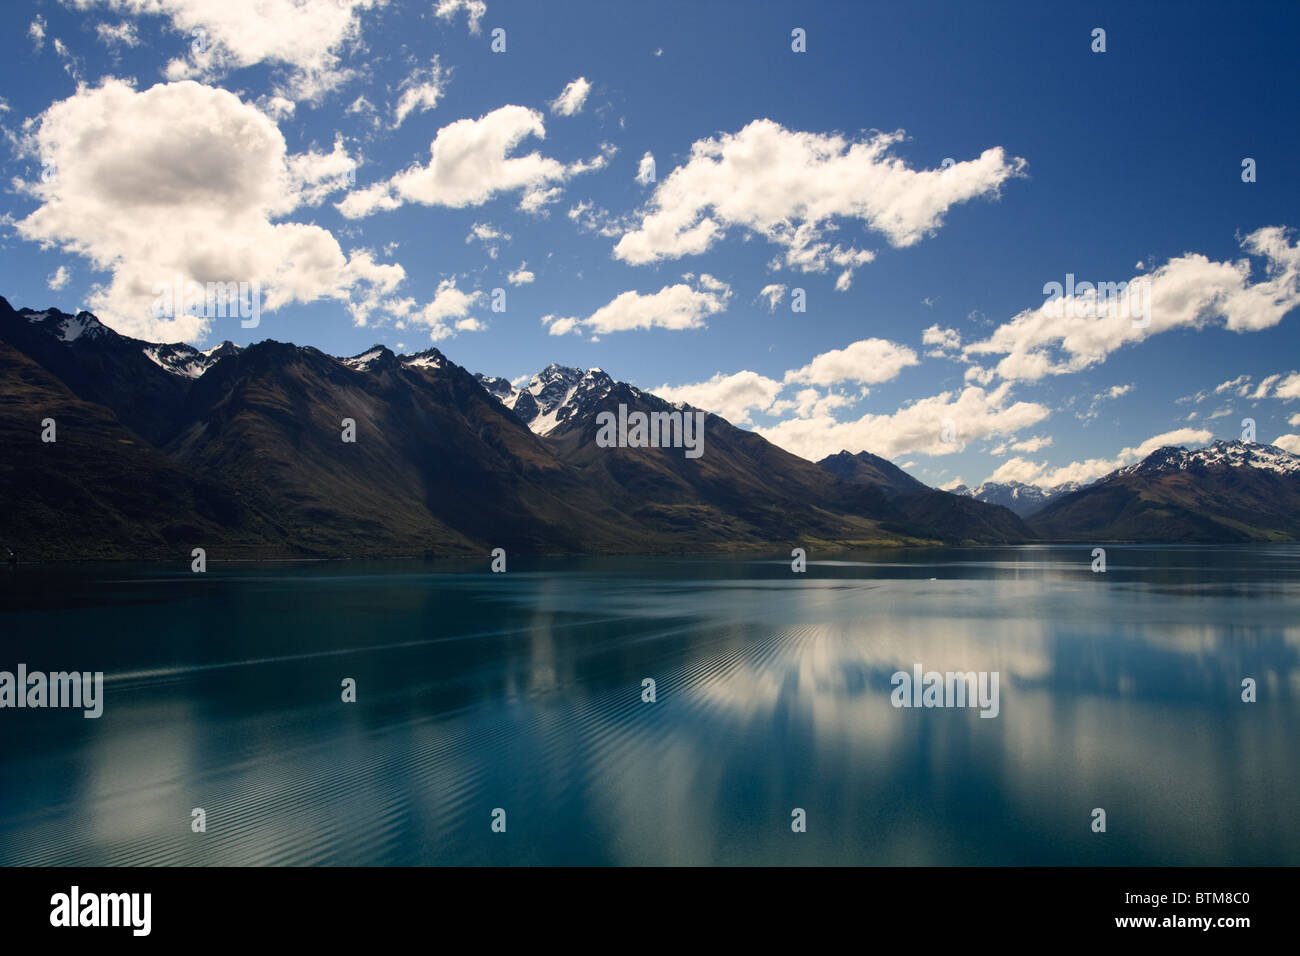 Reflection from Lake Wakatipu surrounded by mountains near Queenstown, South Island, New Zealand Stock Photo